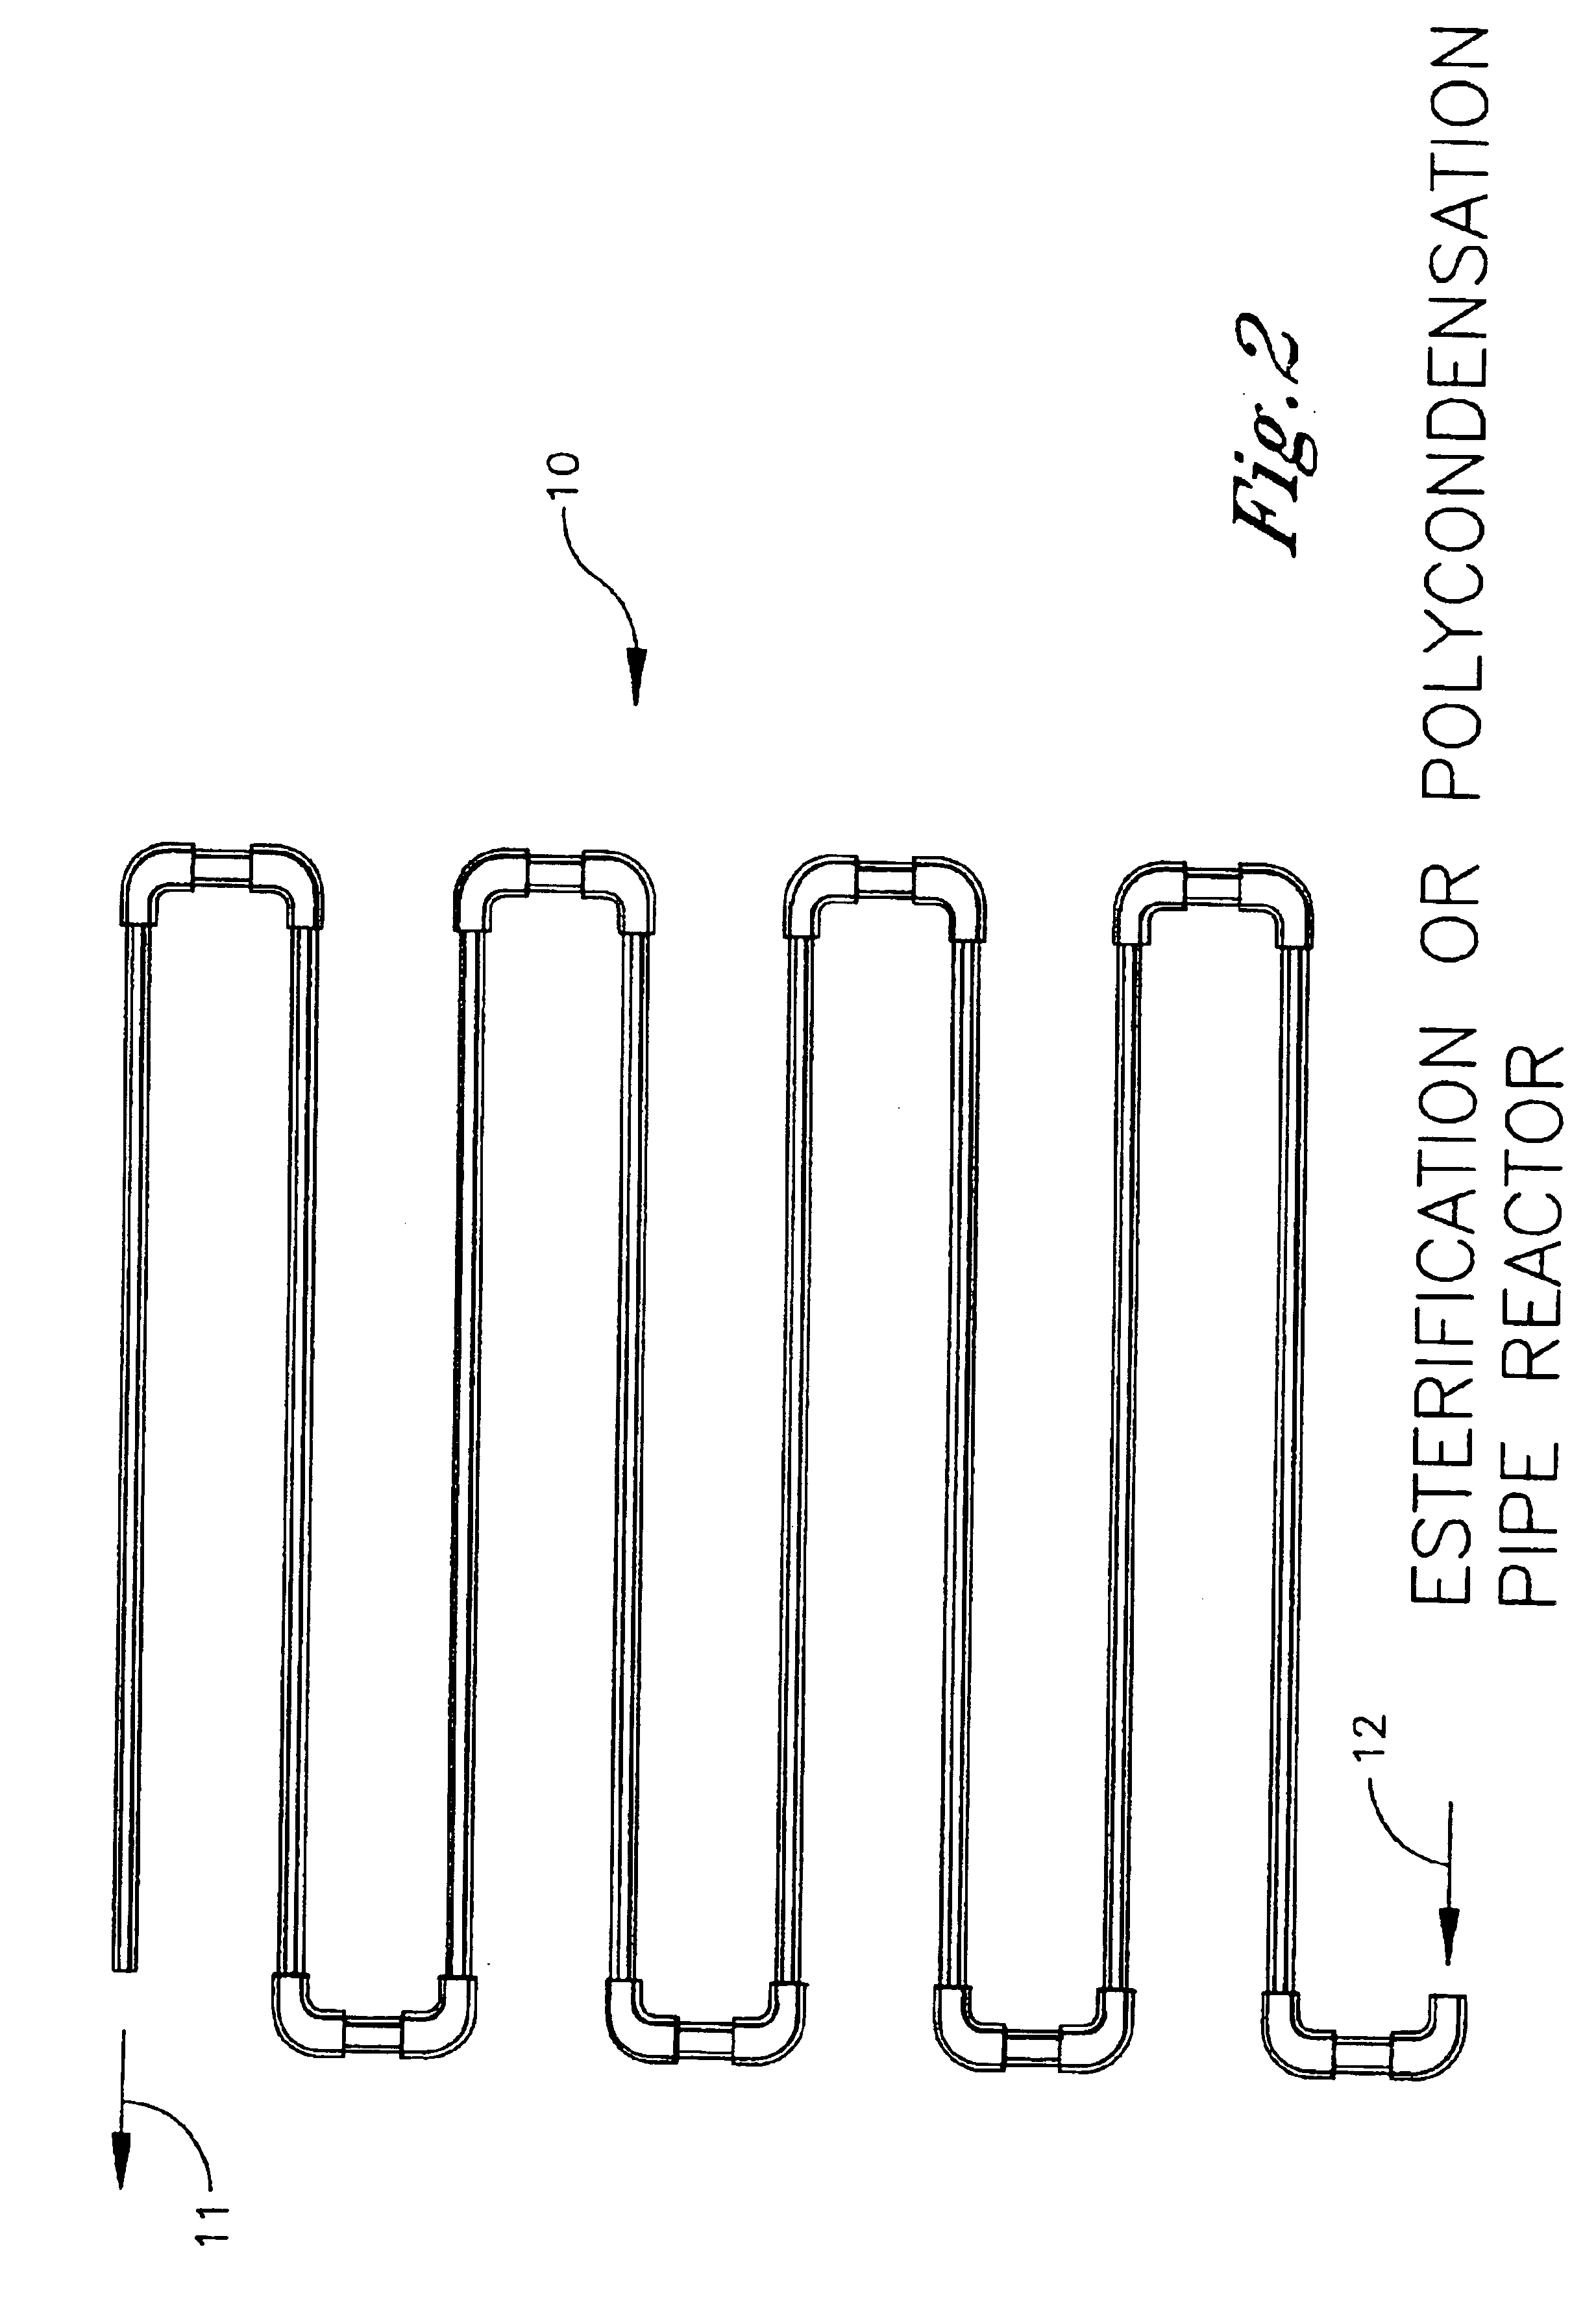 Polyester process using a pipe reactor